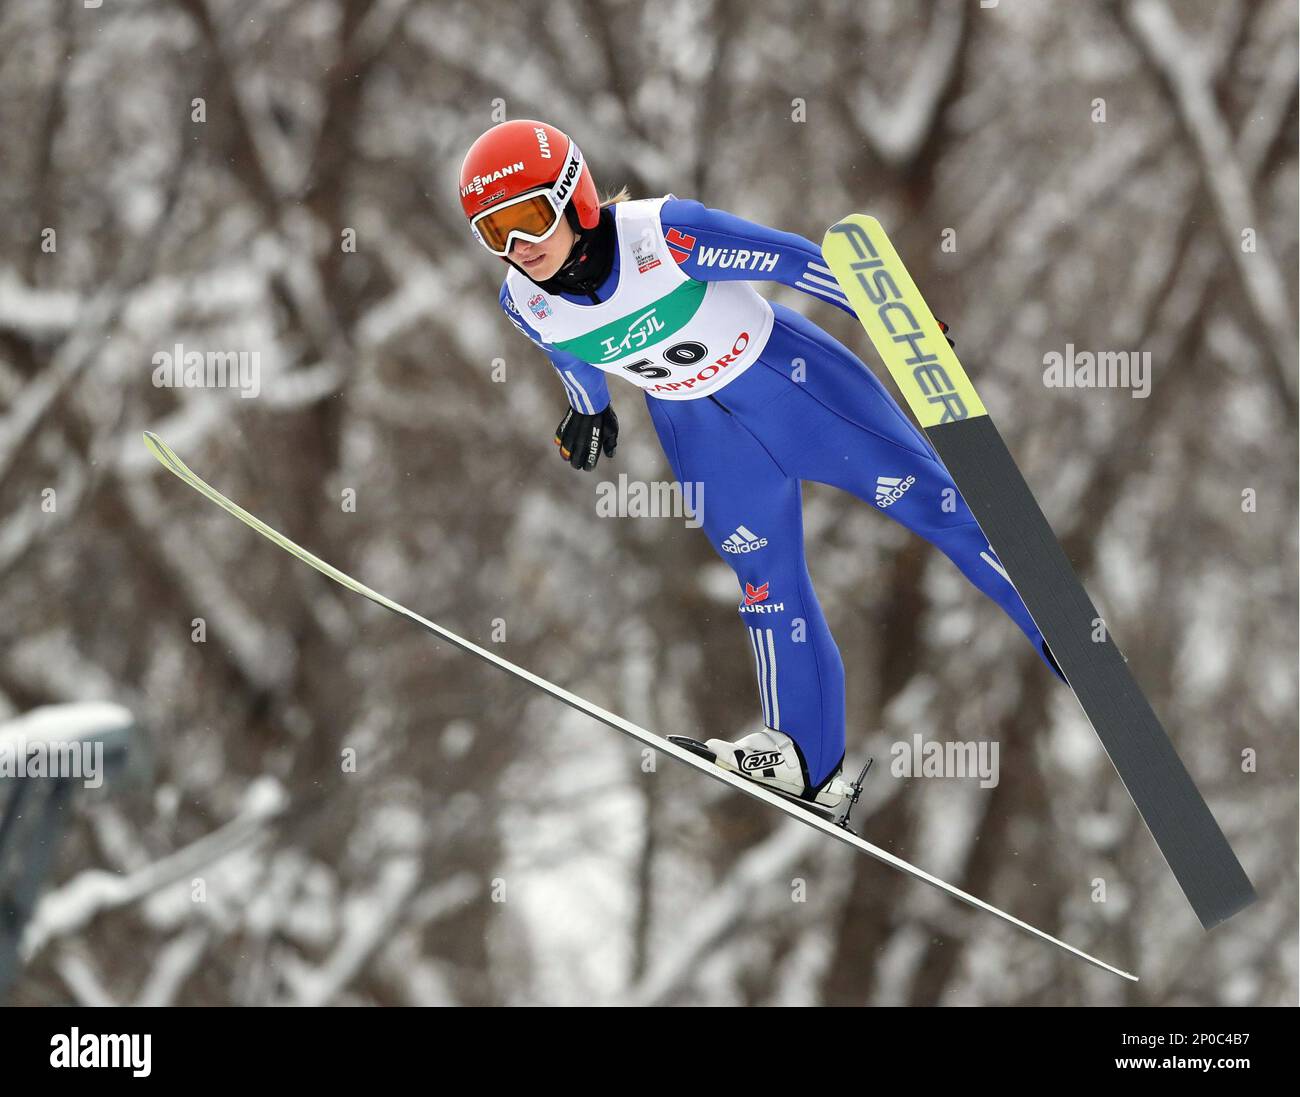 Katharina Althaus of Germany jumps during the women's ski jumping World Cup  in Sapporo, northern Japan, Sunday, Jan. 15, 2017. Maren Lundby of Norway  won the event with a total of 248.5